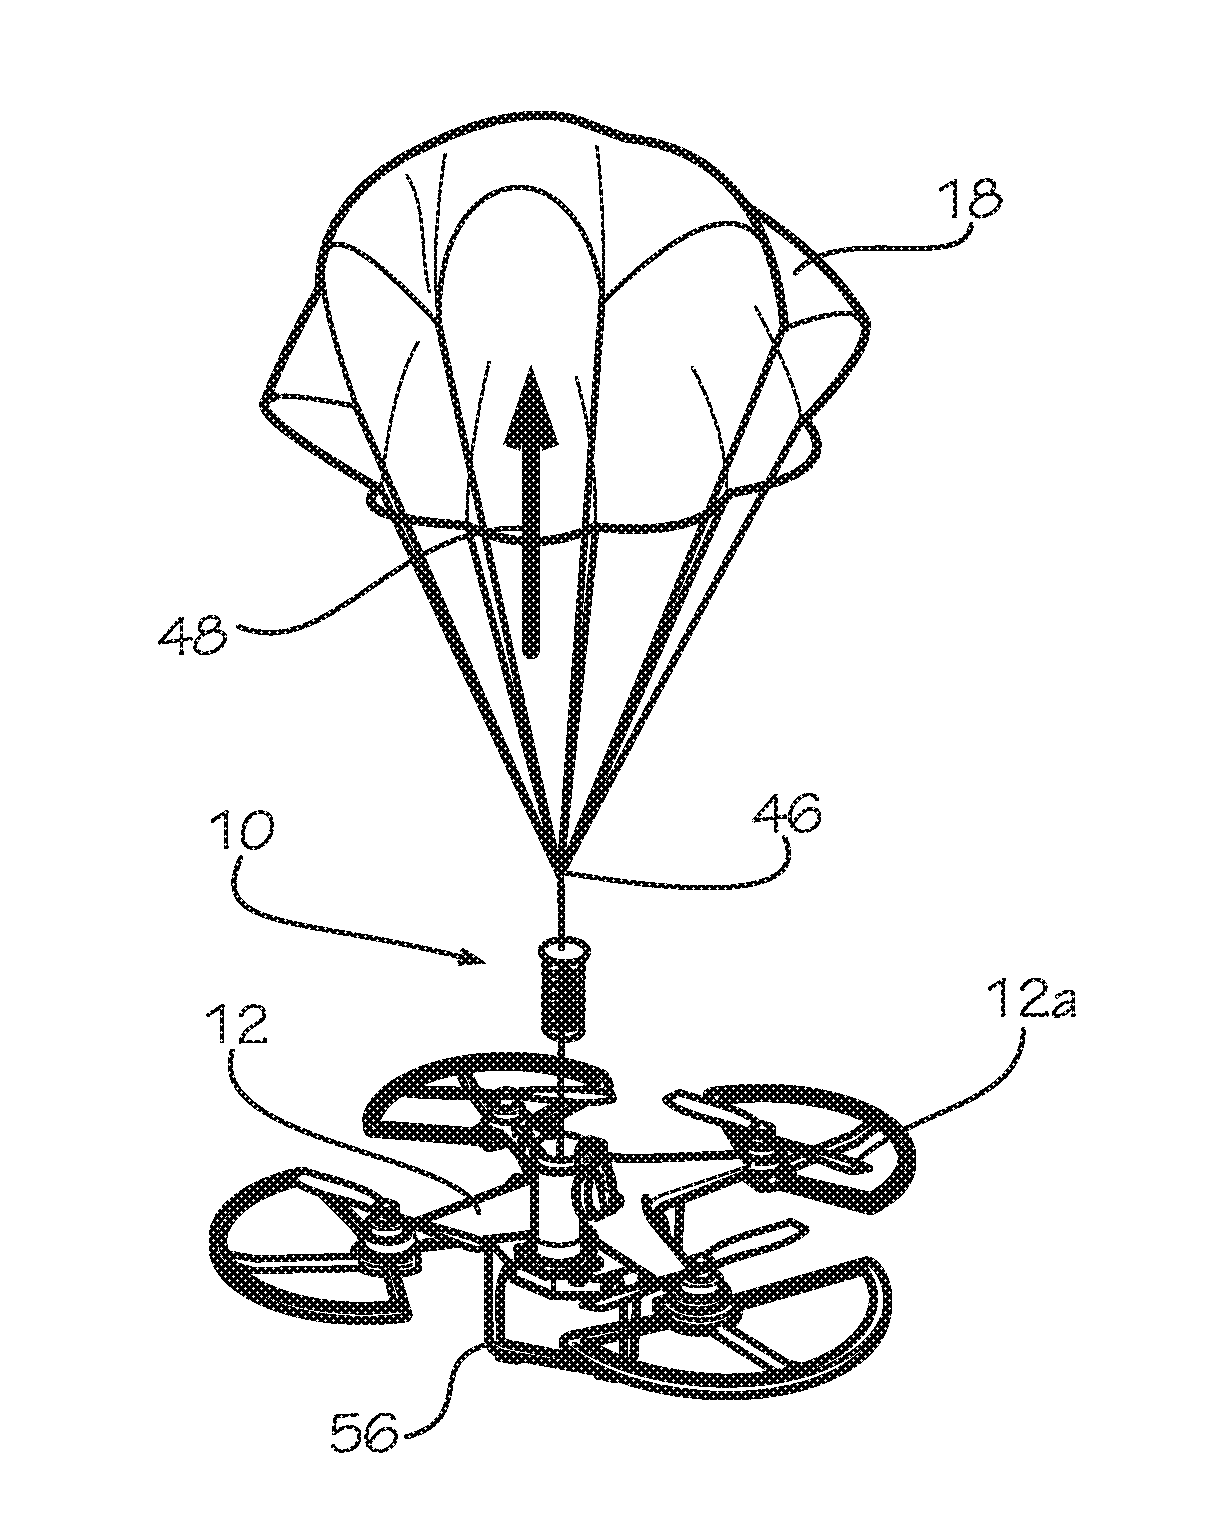 Autonomous safety and recovery system for unmanned aerial vehicles